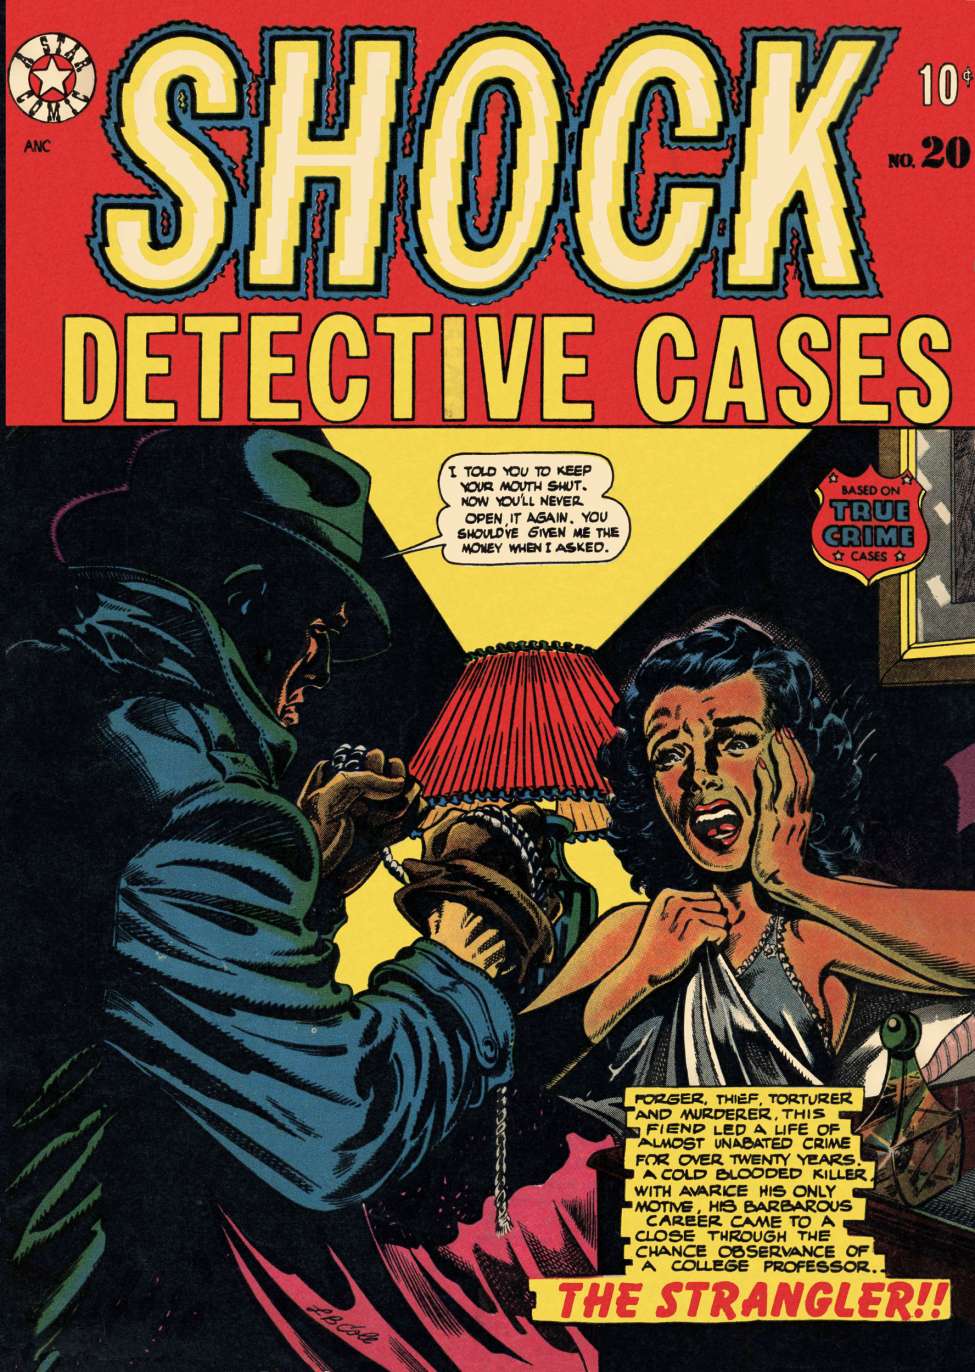 Book Cover For Shock Detective Cases 20 - Version 1